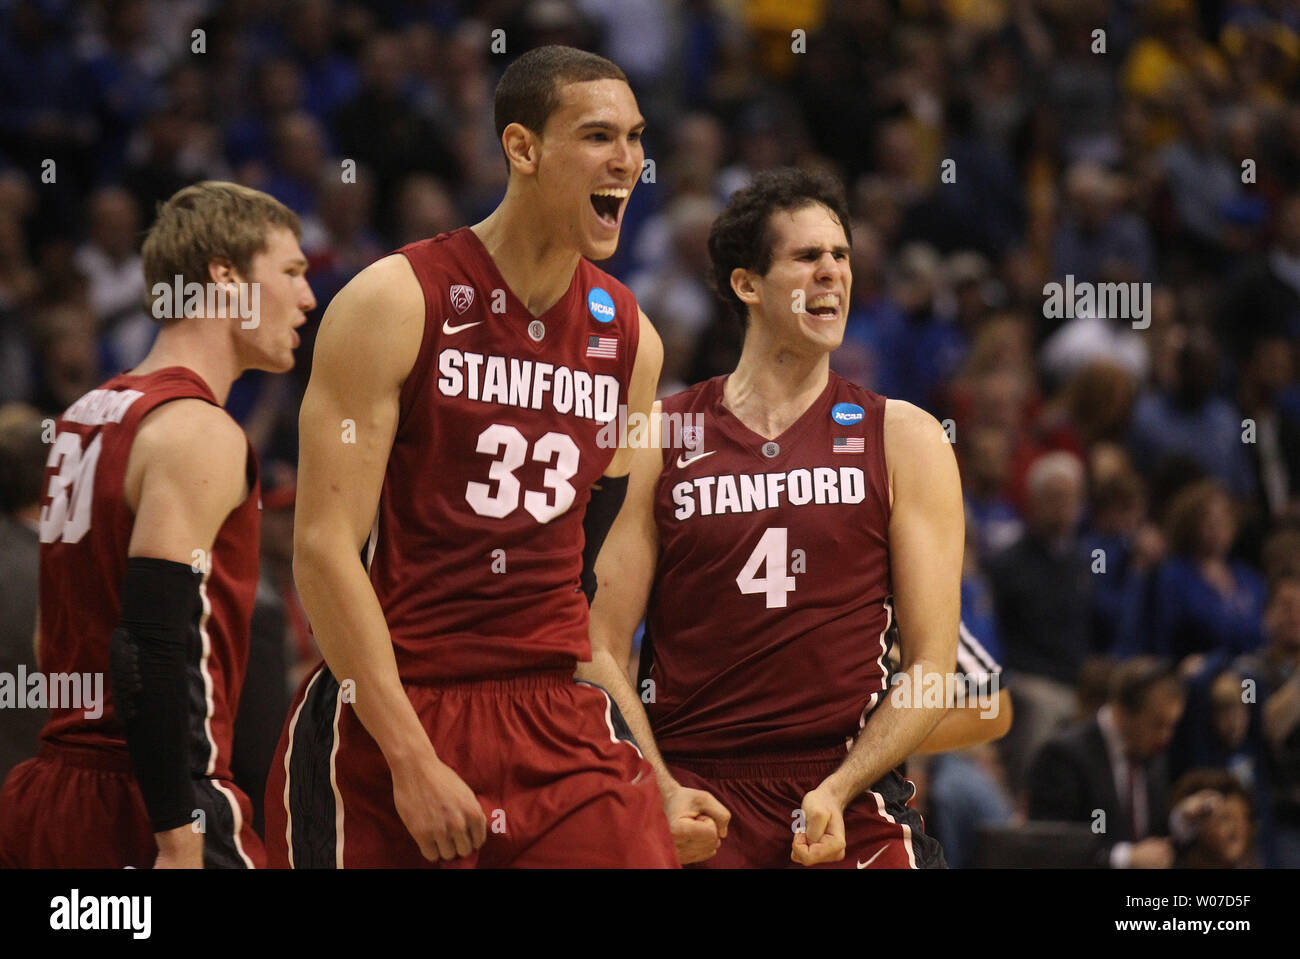 https://c8.alamy.com/comp/W07D5F/stanford-cardinal-players-dwight-powell-33-and-stefan-nastic-4-celebrate-their-60-57-win-over-kansas-as-the-buzzer-sounds-in-the-ncaa-division-1-mens-basketball-championship-game-at-the-scottrade-center-in-st-louis-on-march-23-2014-upibill-greenblatt-W07D5F.jpg